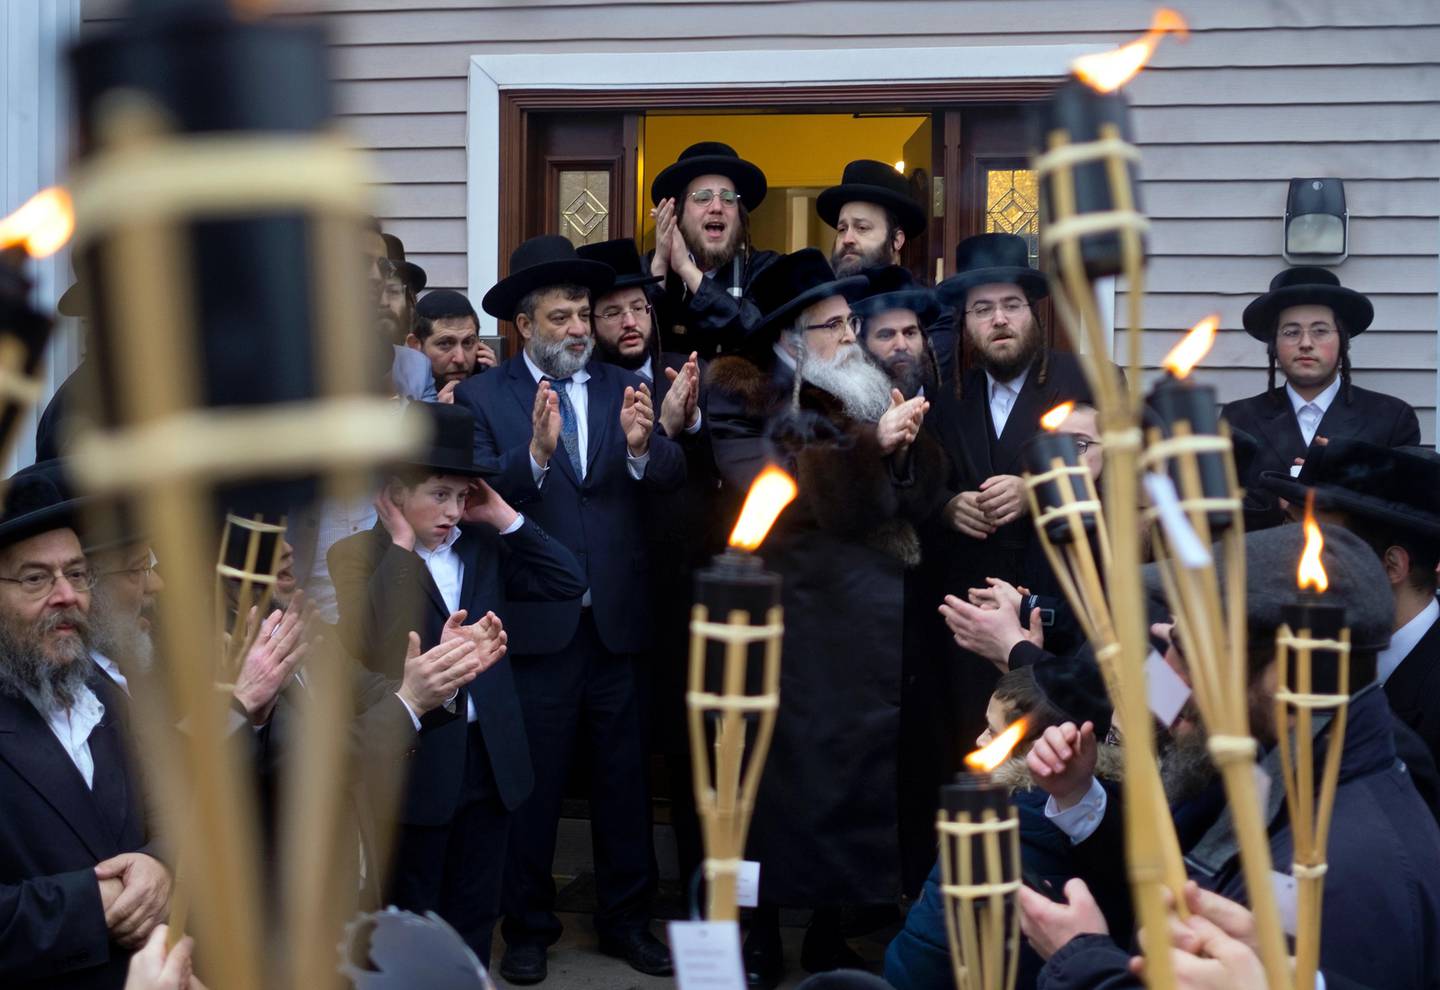 Community members celebrate the arrival of a new Torah at Chaim Rottenberg residence, Sunday, Dec. 29, 2019, in Monsey, N.Y. A day earlier, a knife-wielding man stormed into the home and stabbed multiple people as they celebrated Hanukkah in the Orthodox Jewish community. (AP Photo/Craig Ruttle)